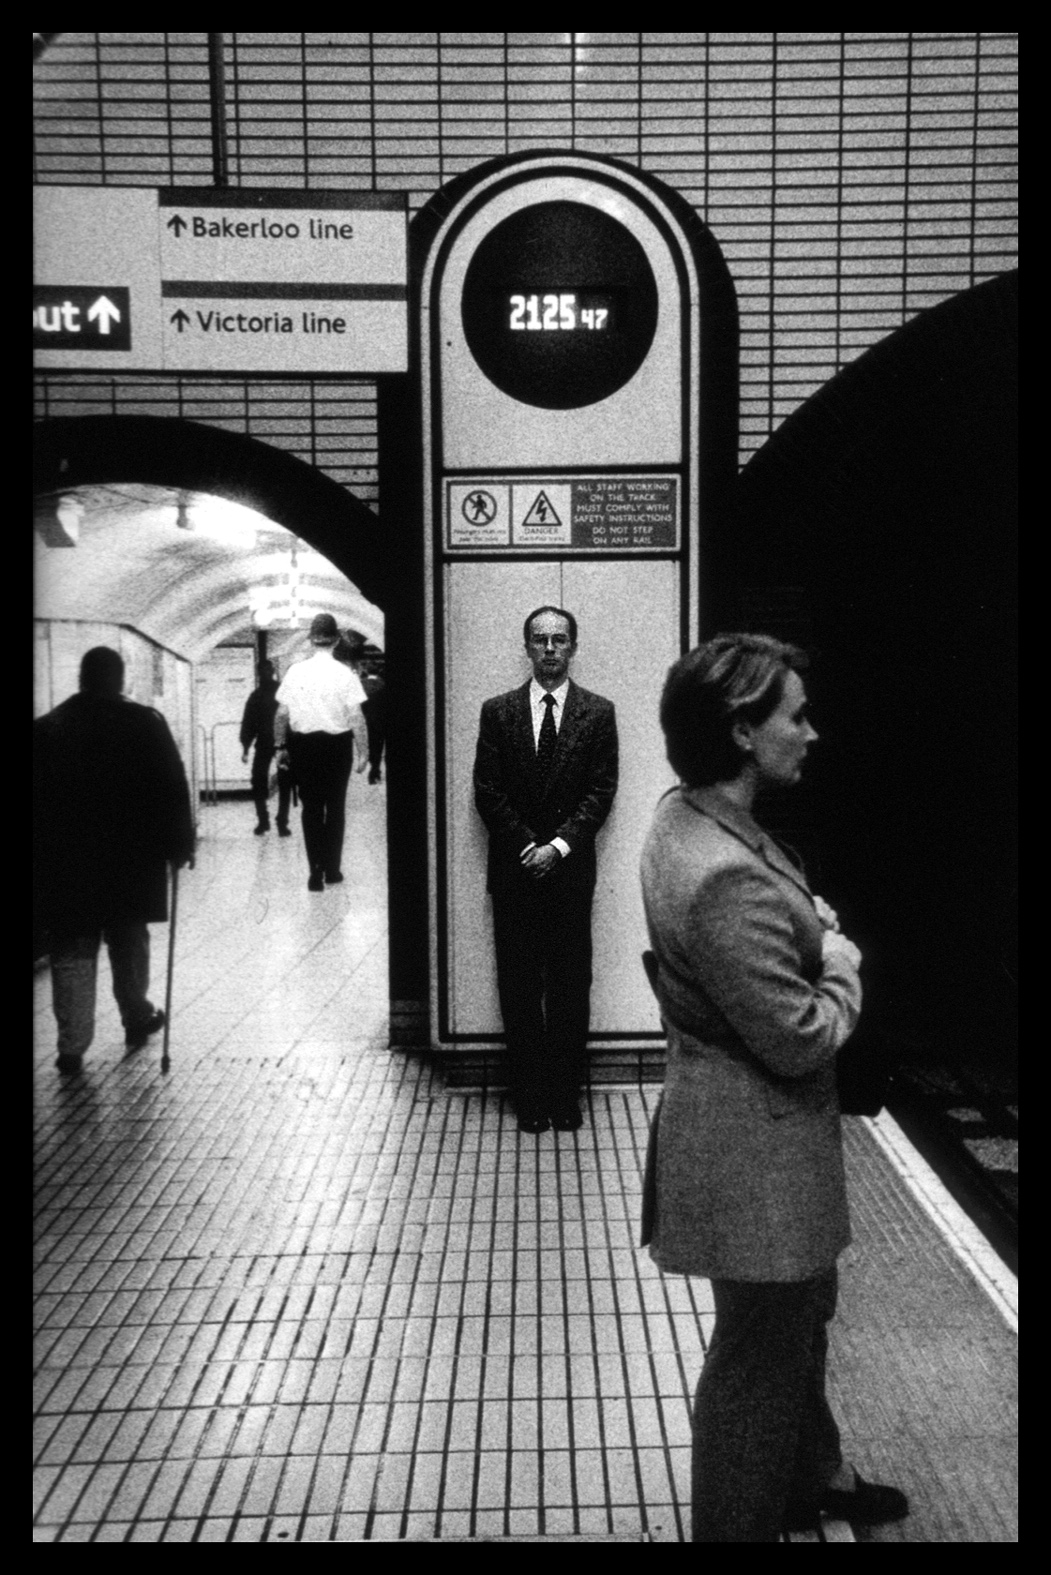   London, England &nbsp;- Series from London's metro, 1999.     “The guard is down and the mask is off: even more than when in lone bedrooms (where there are mirrors). People’s faces are in naked repose in the subway.”&nbsp;     - Walker Evans 